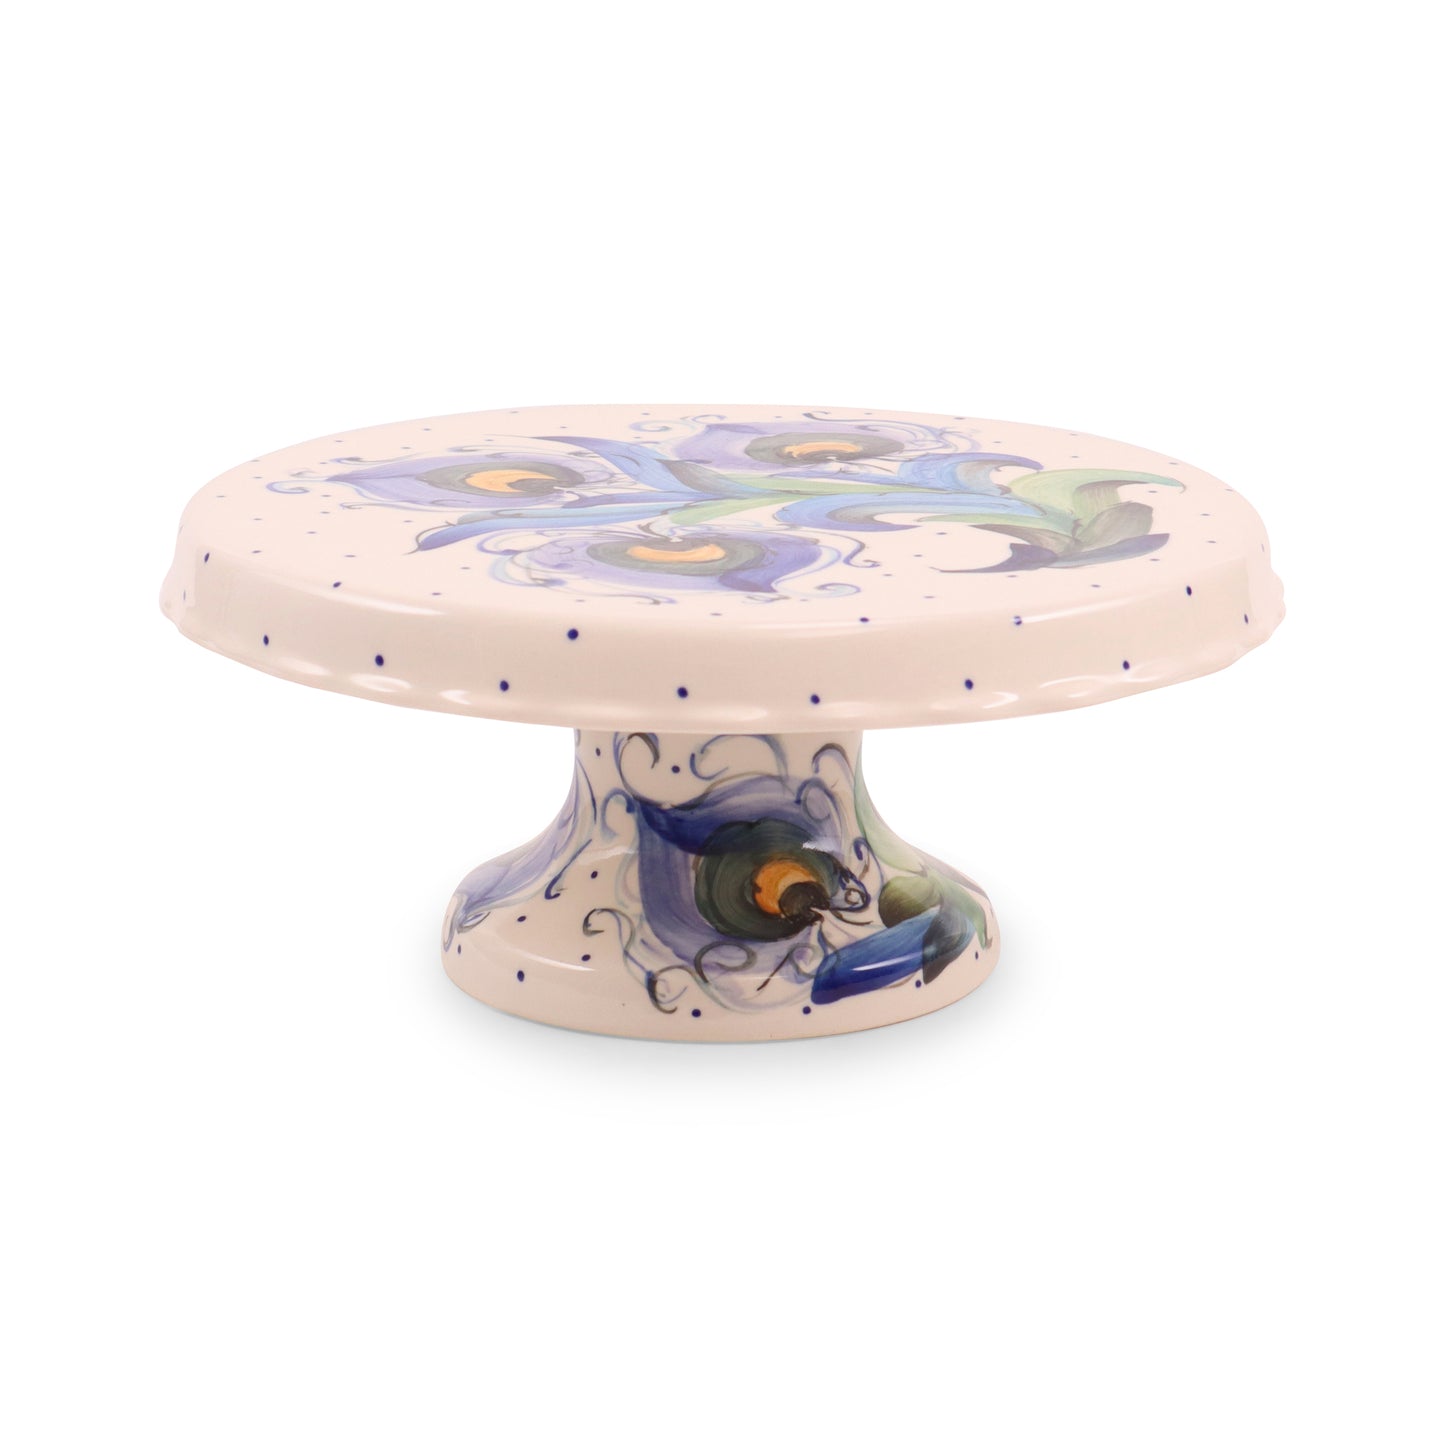 11"x4" Cake Stand. Pattern: Cool Evening